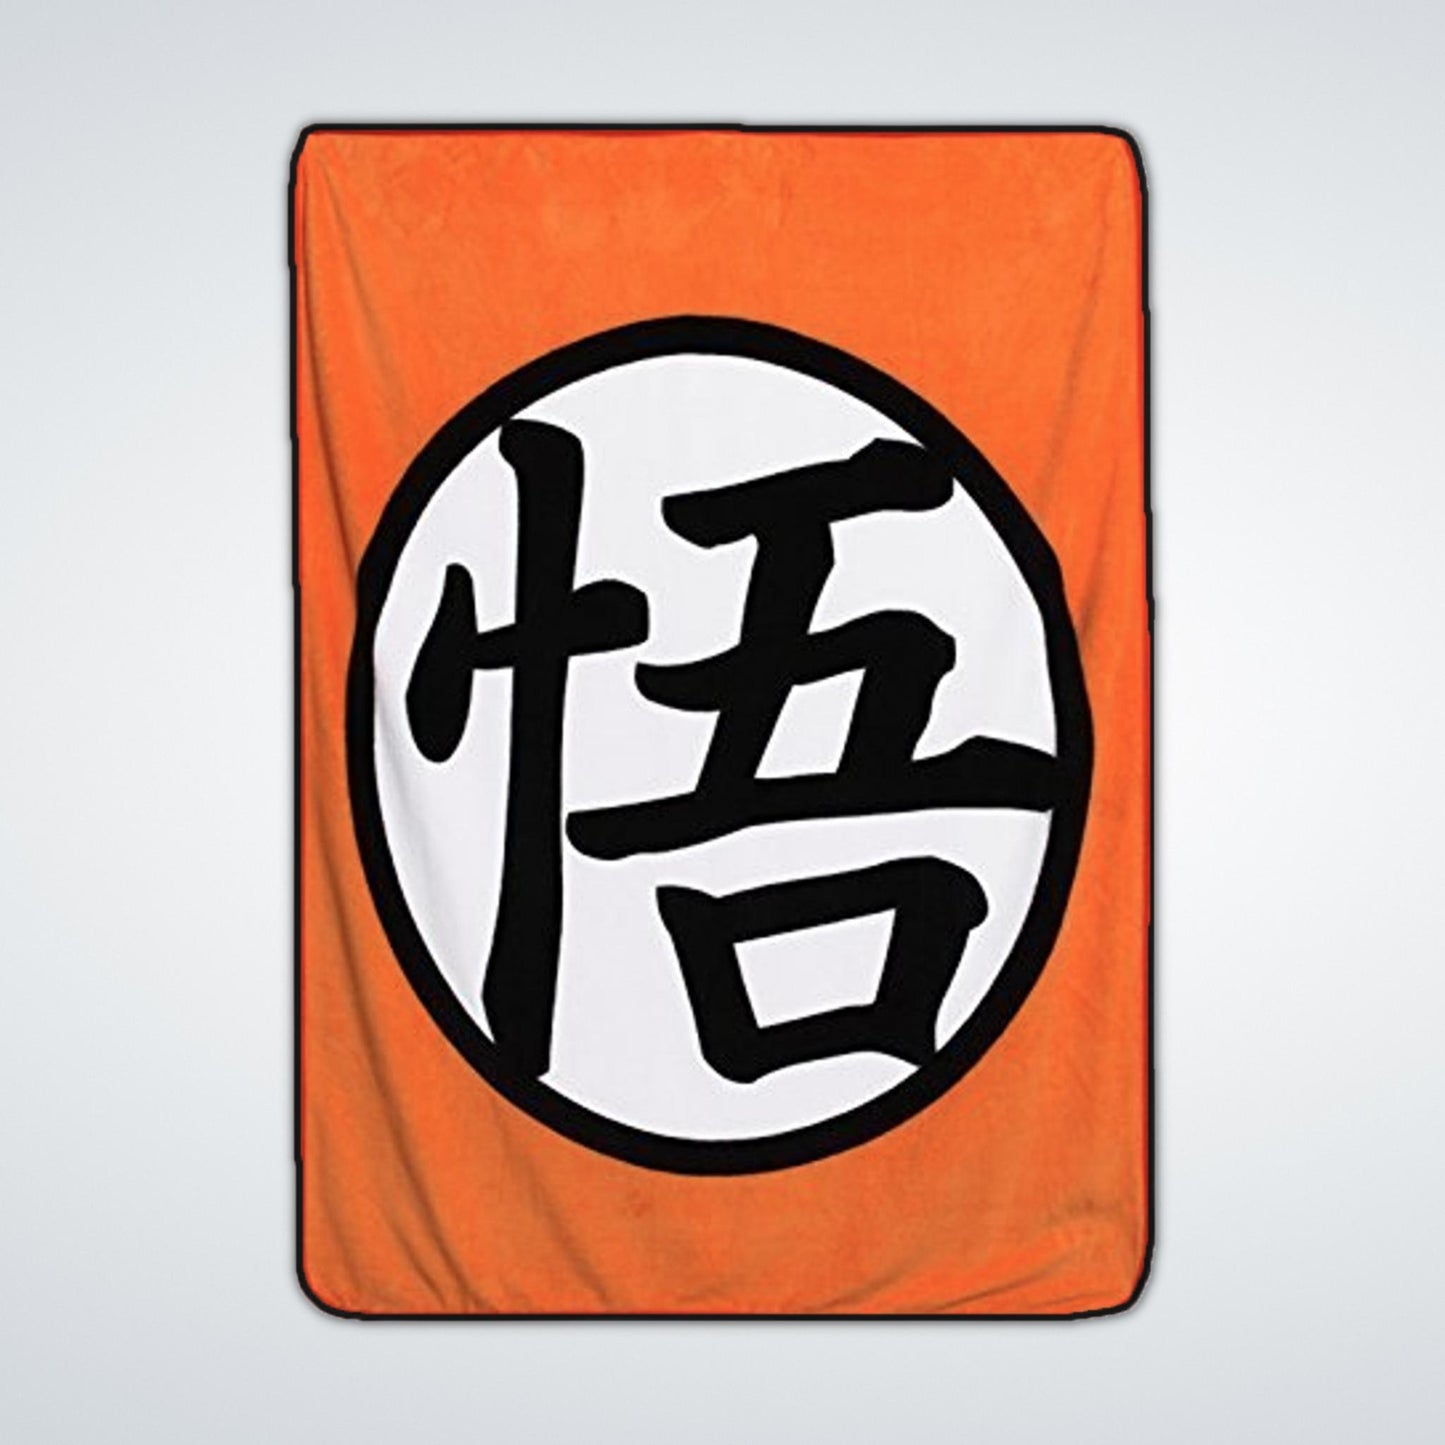 What is the meaning behind Goku's symbol? - Quora